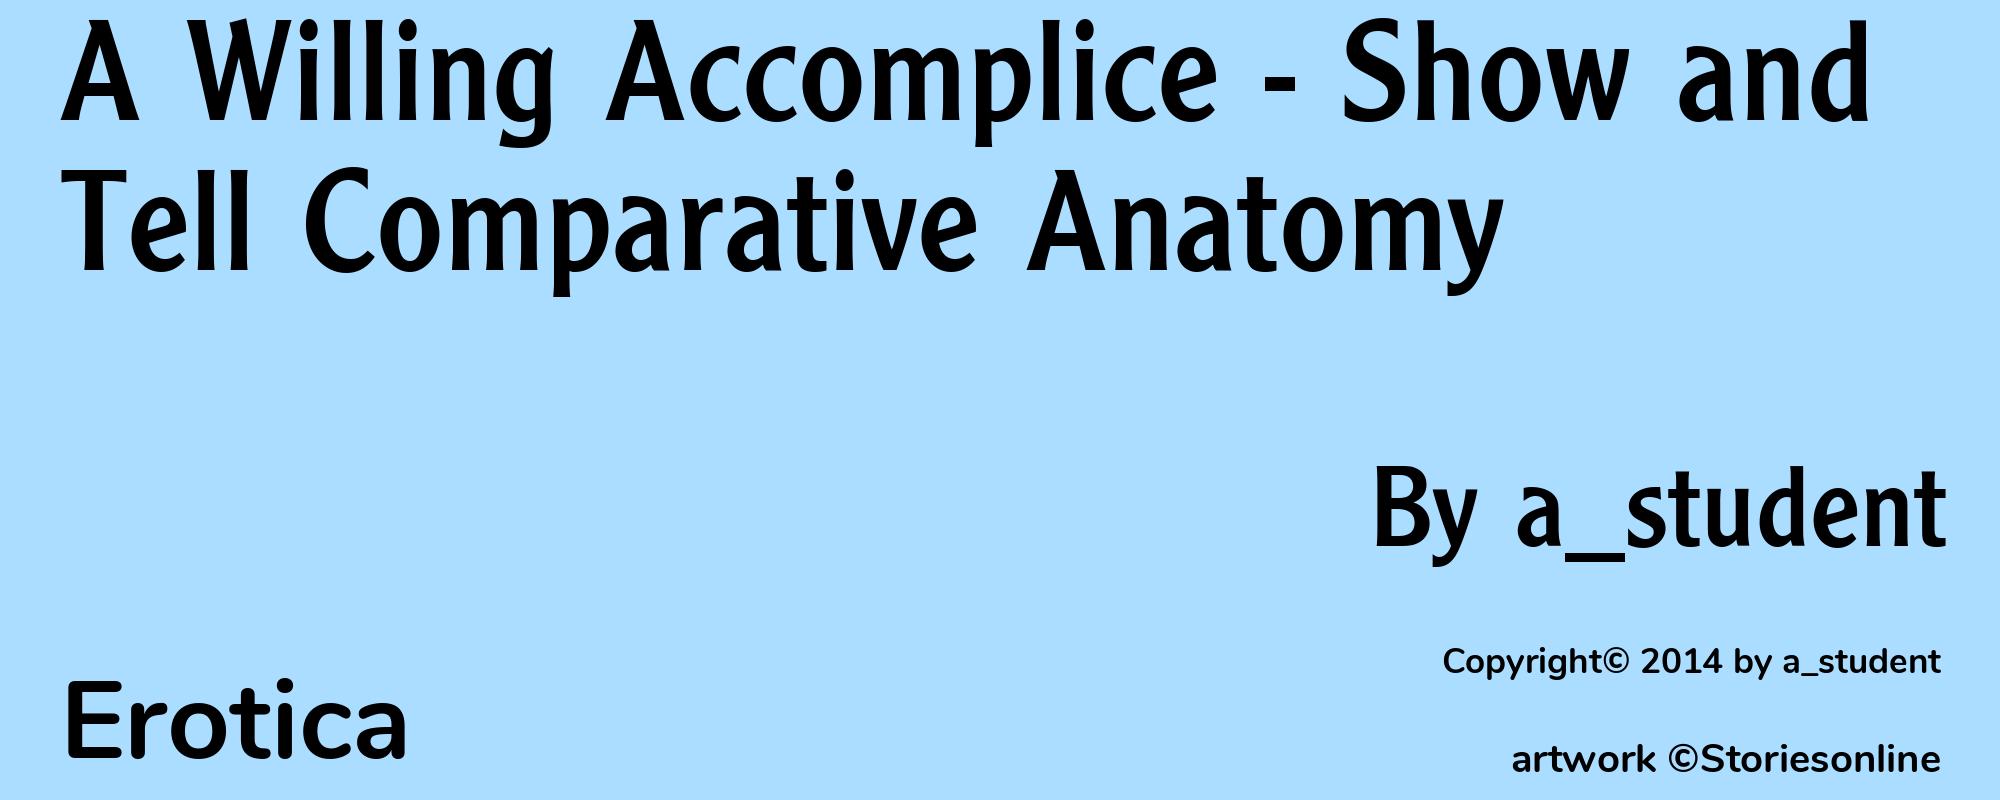 A Willing Accomplice - Show and Tell Comparative Anatomy - Cover